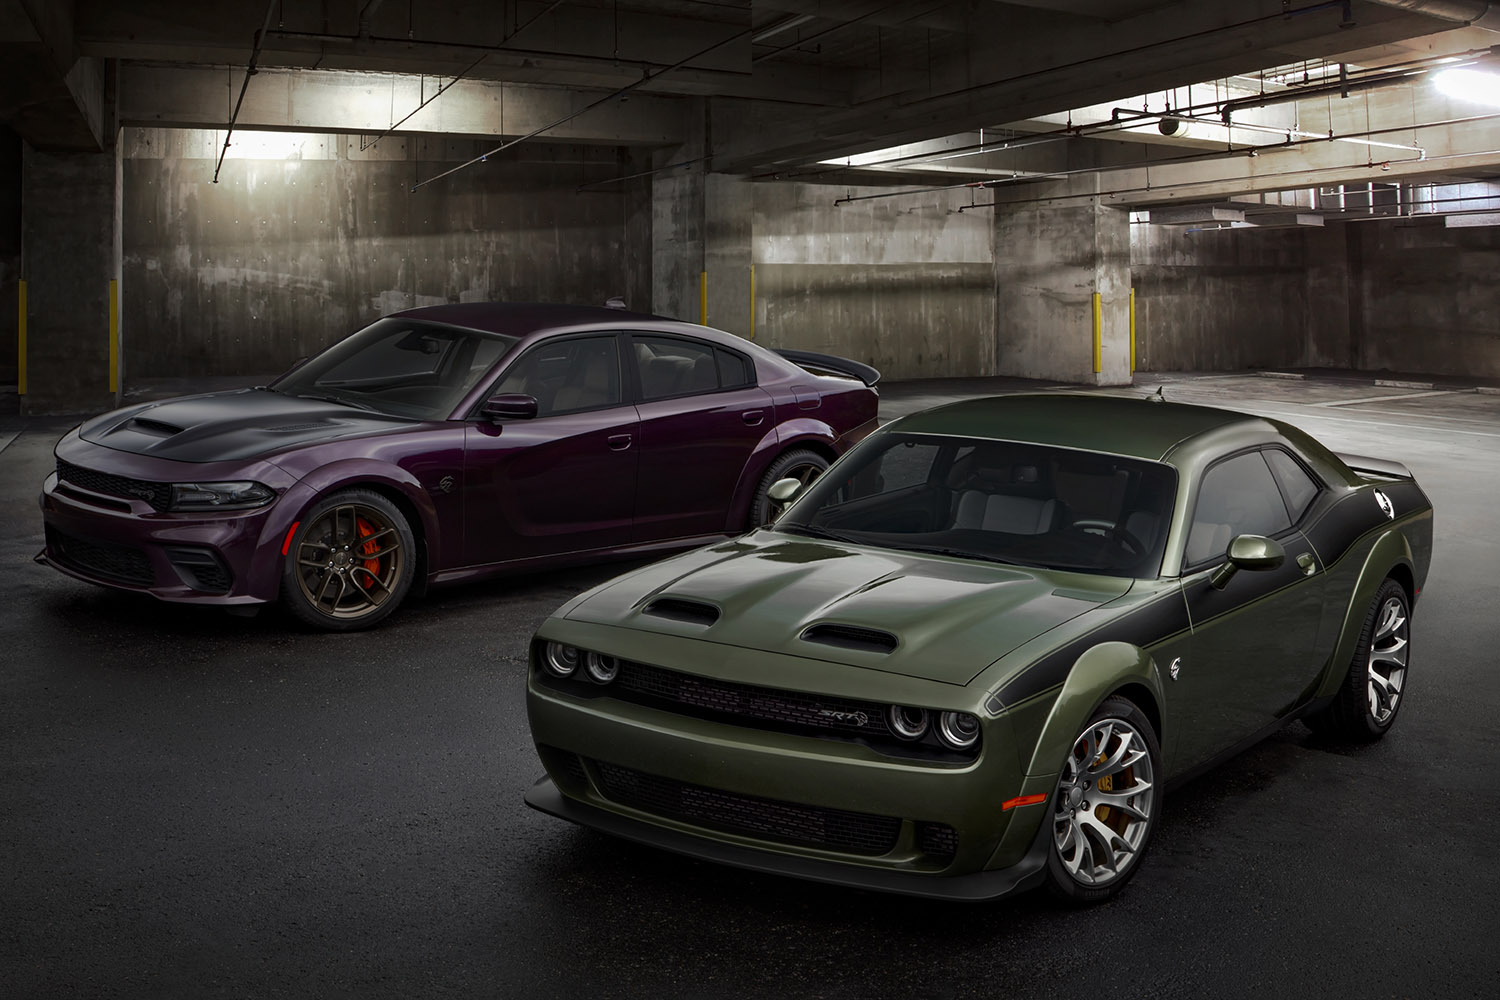 SRT versions of the Dodge Challenger and Dodge Charger